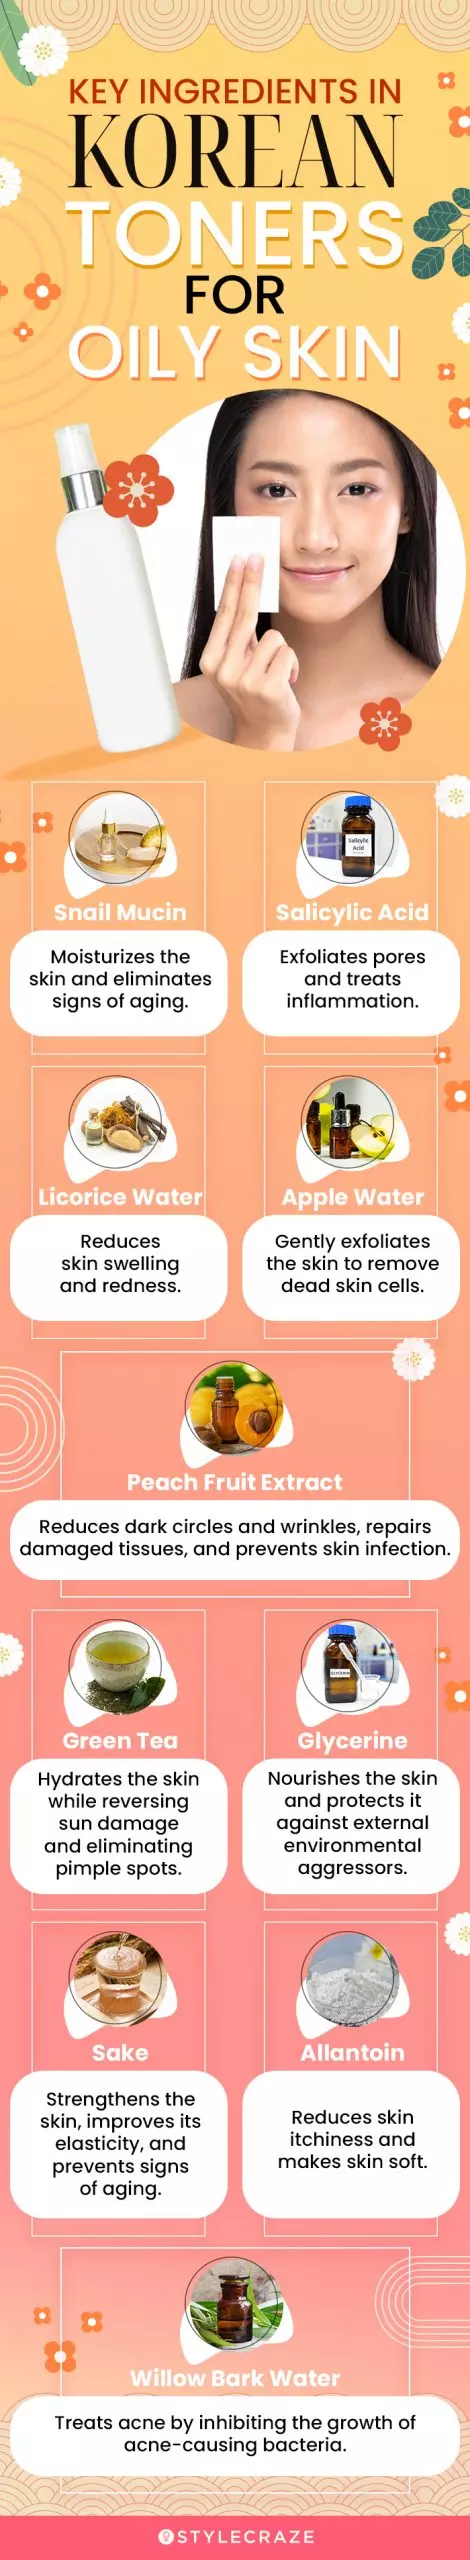 Key Ingredients In Korean Toners For Oily Skin (infographic)